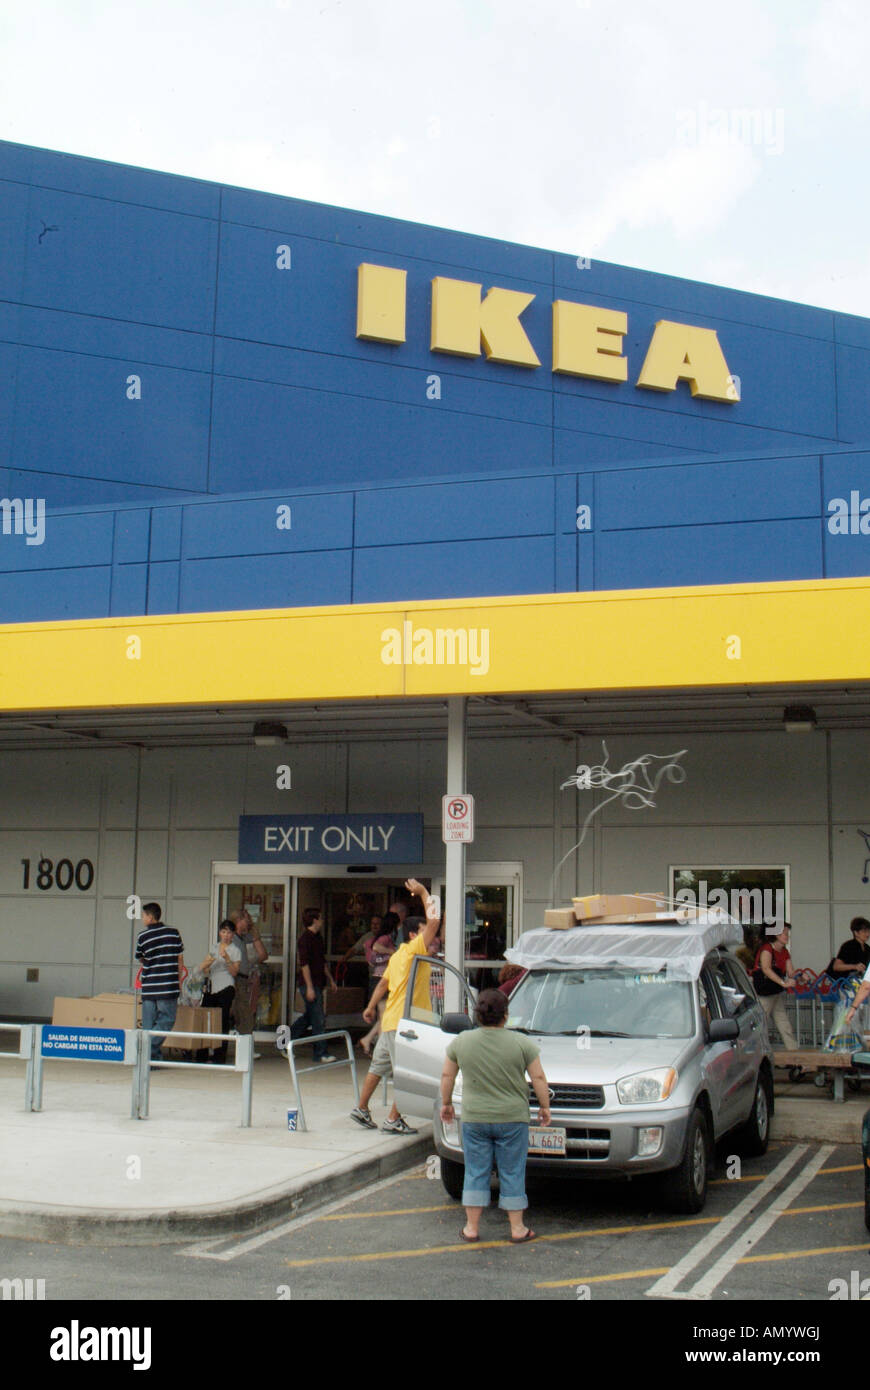 Swedish department store, Ikea, in Chicagoland area Stock Photo - Alamy